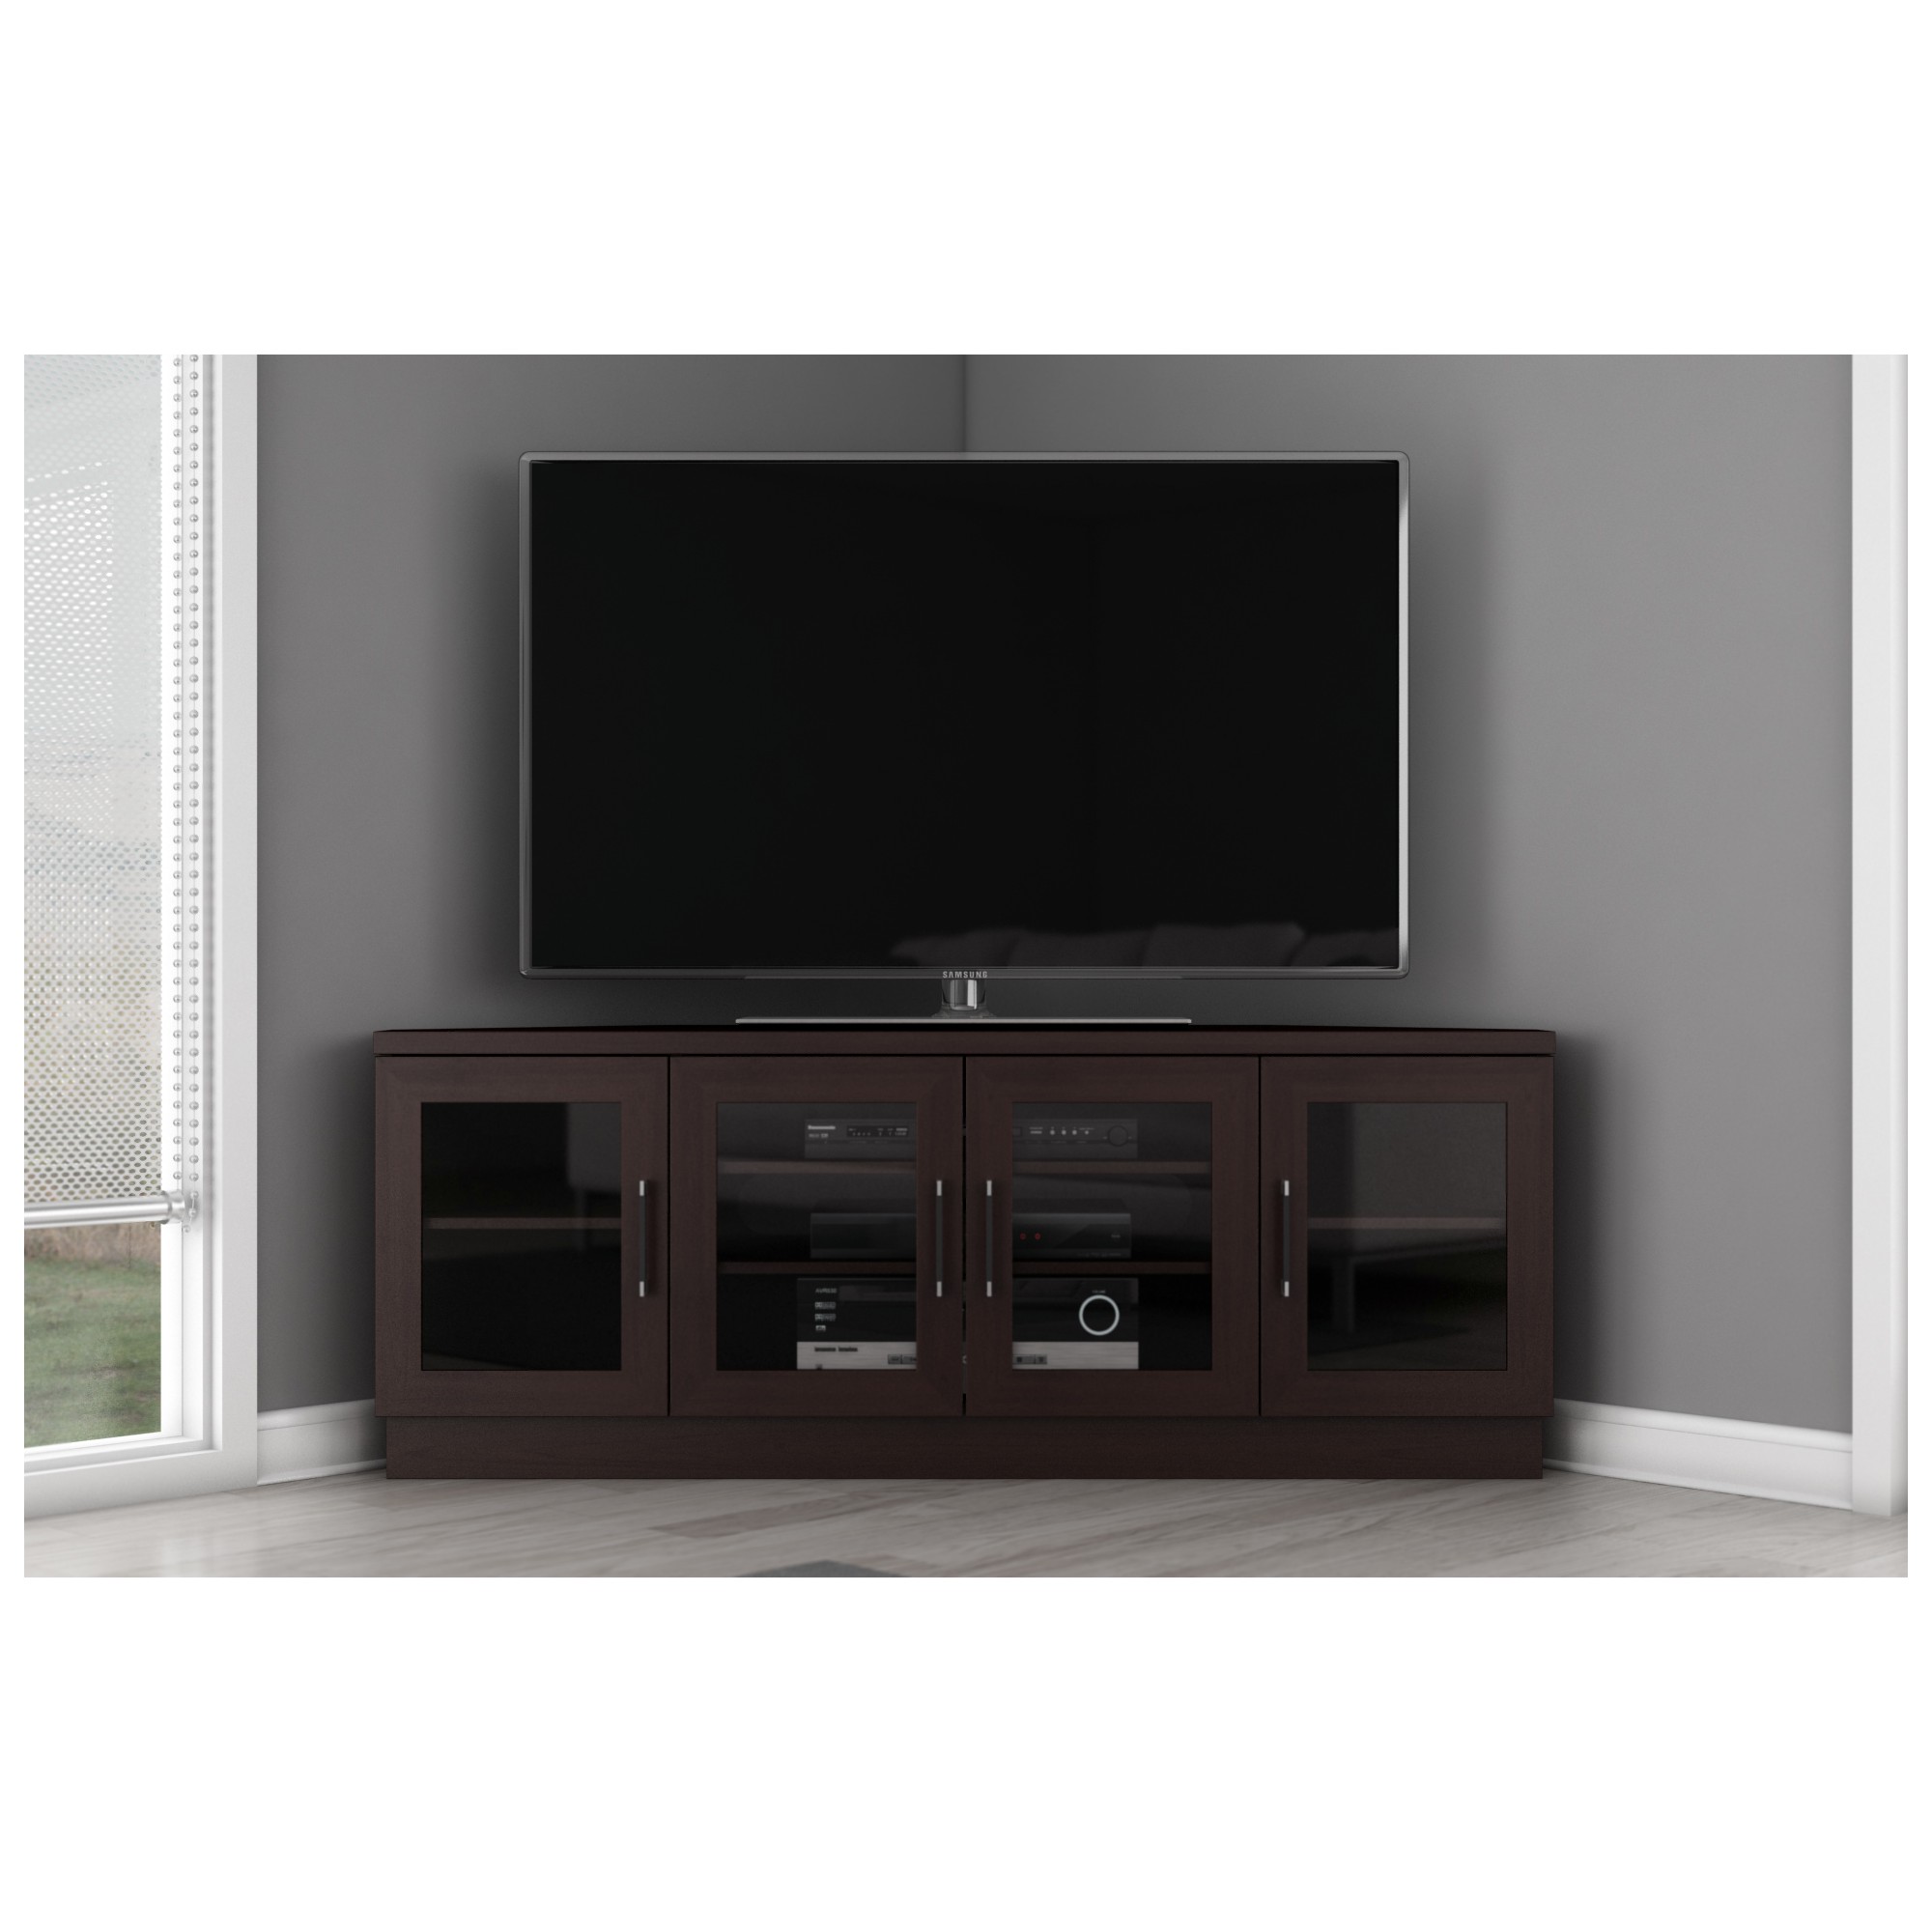 mengsel Ministerie beroemd Furnitech FT60CCCW 60" TV Stand Contemporary Corner Media Cabinet in Wenge